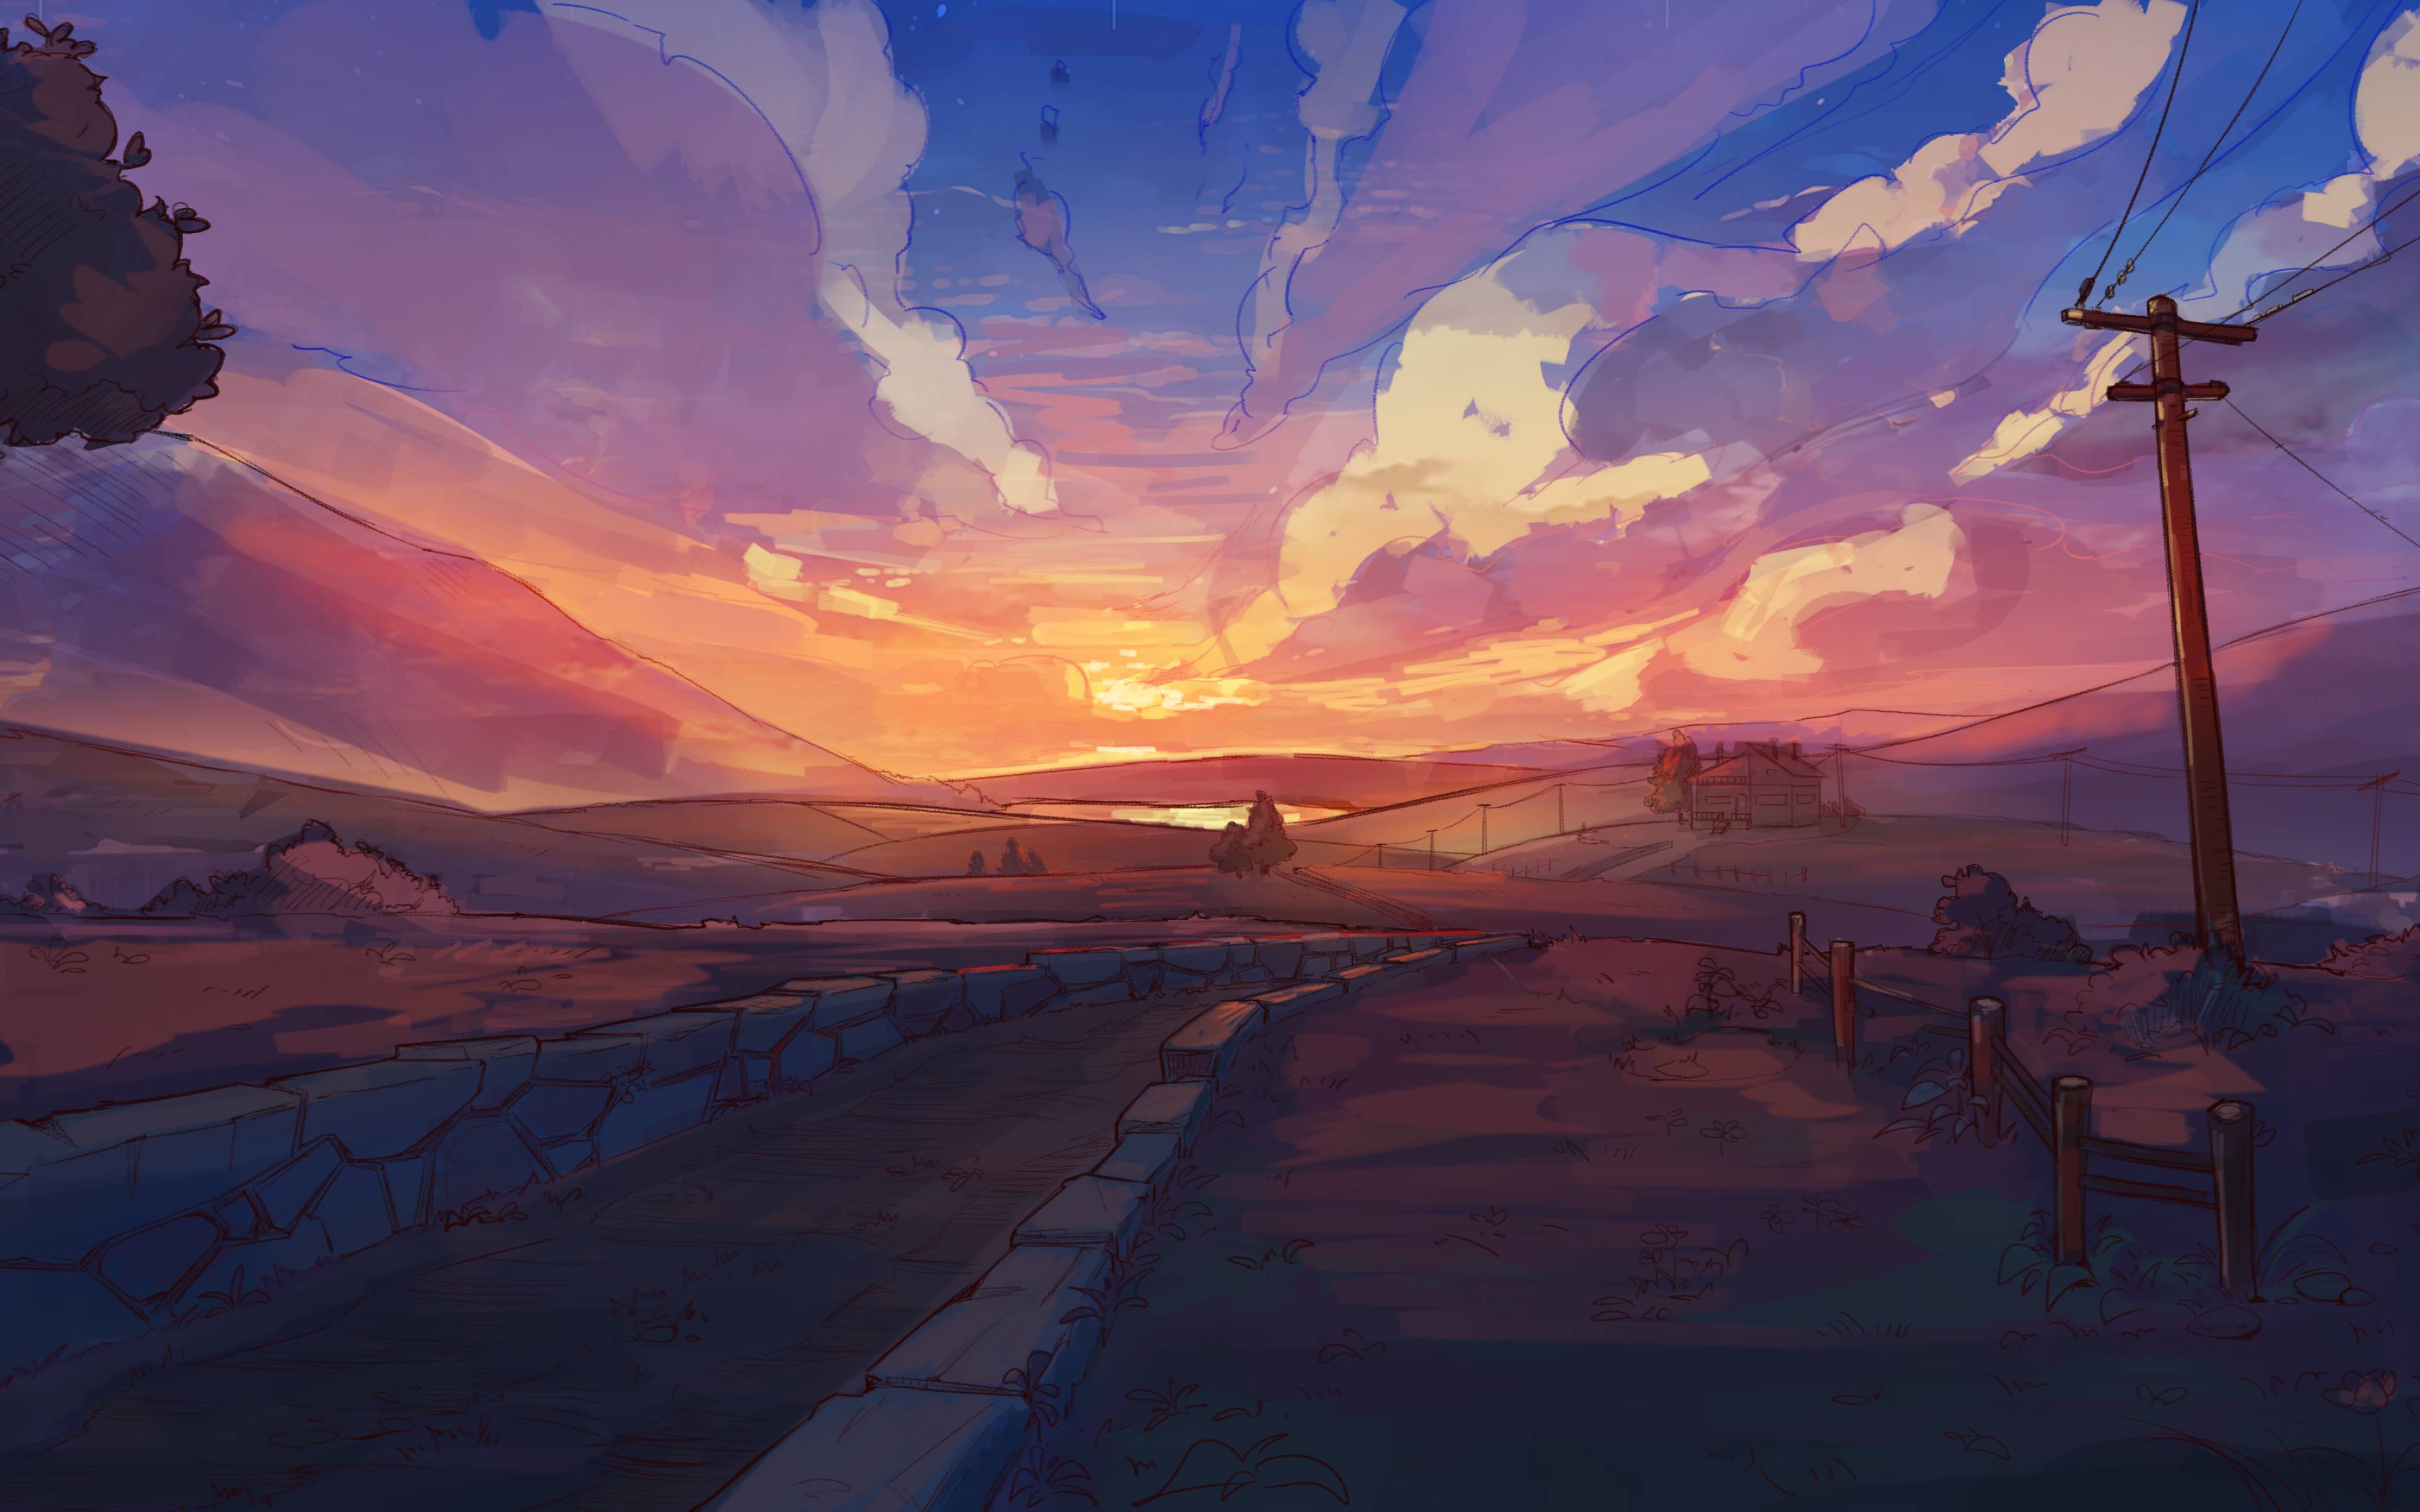 A digital painting of a beautiful sunset over a dirt road - Anime landscape